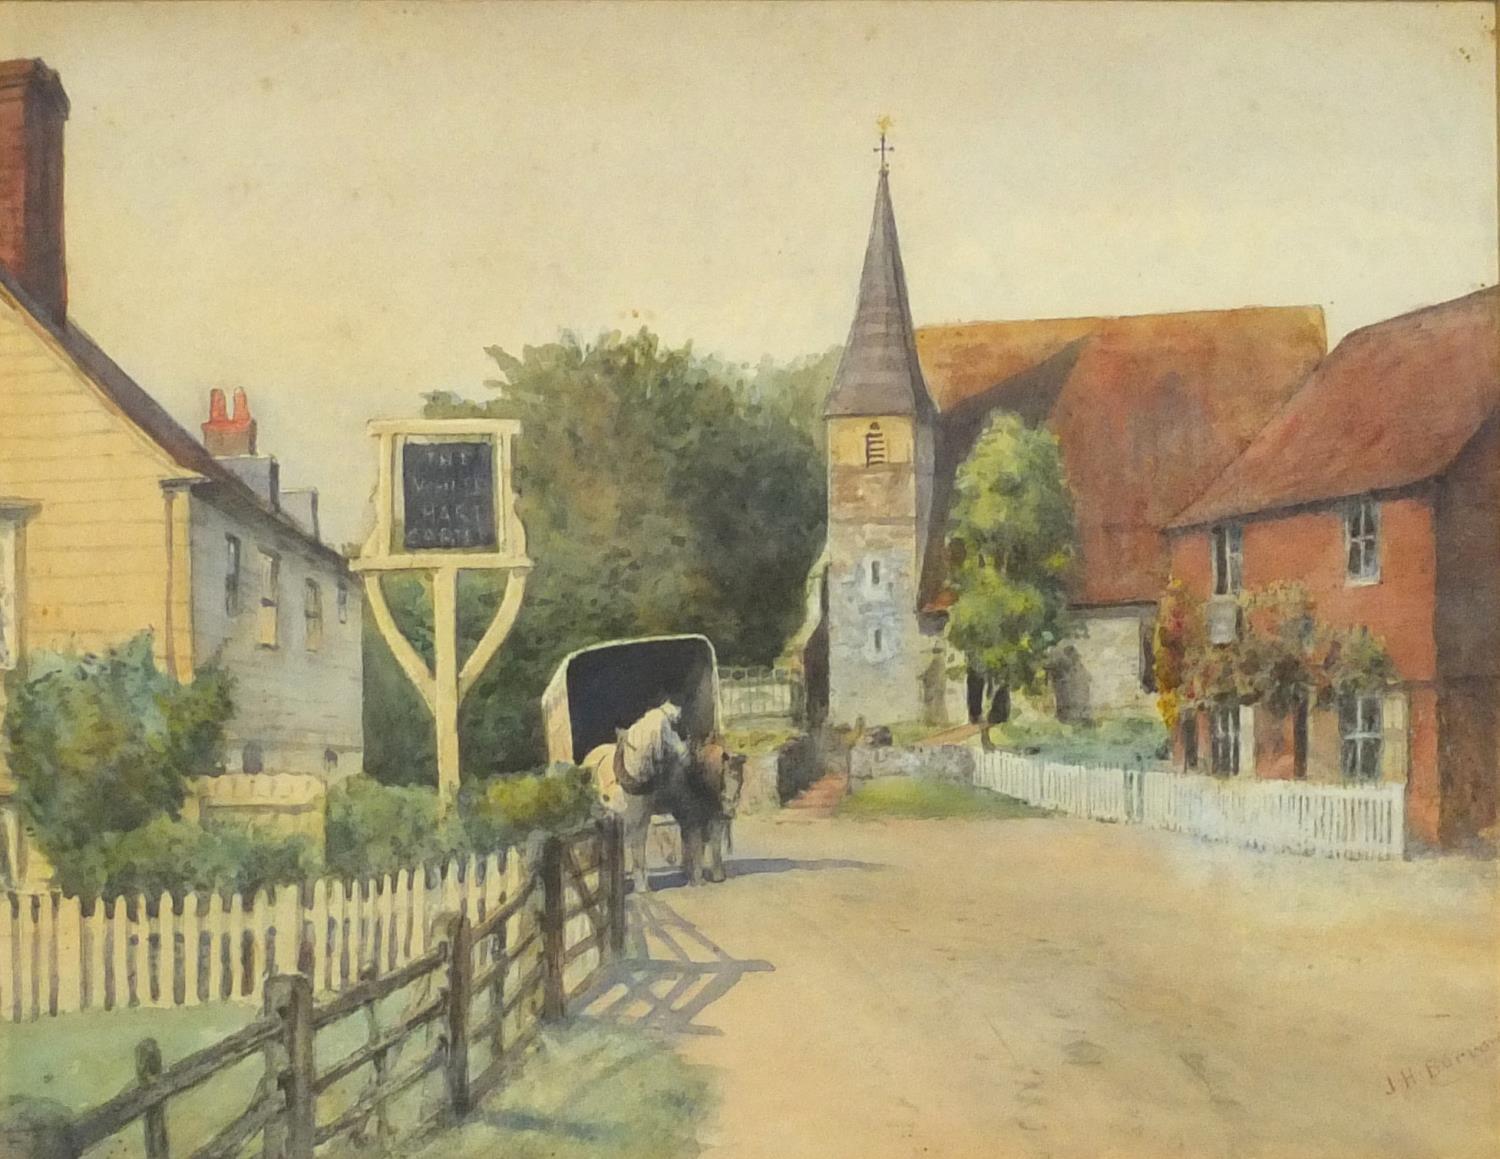 J H Burrow - Street scene with horse drawn cart, watercolour, mounted, framed and glazed, 28cm x